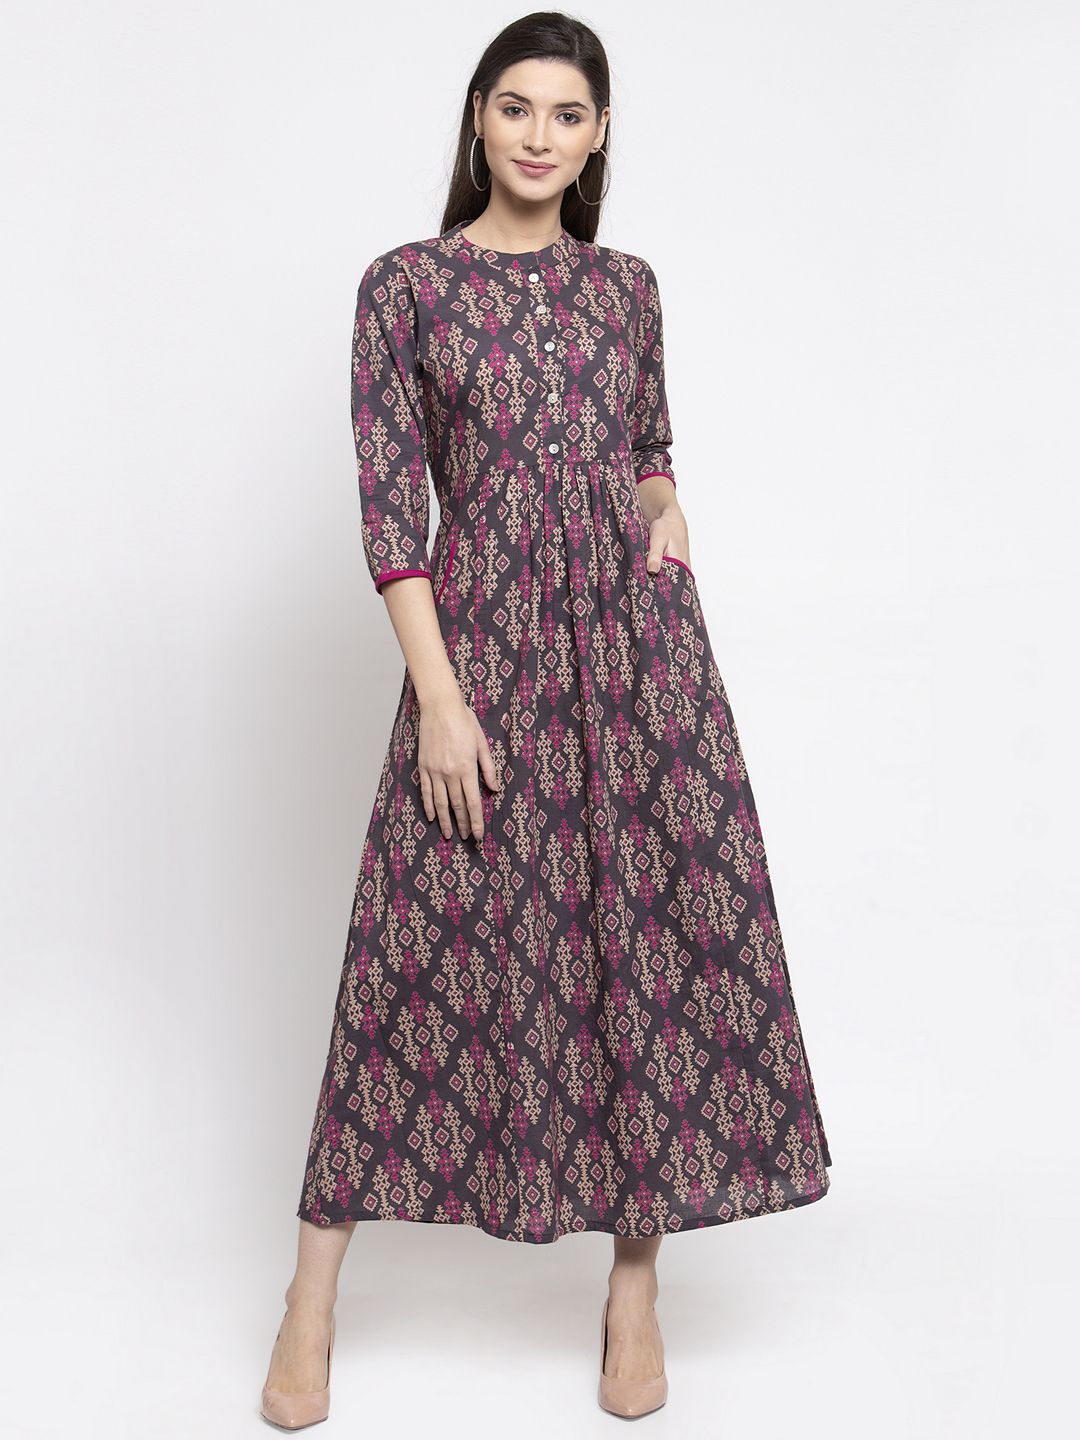 Indibelle Women Charcoal Grey & Beige Printed Fit and Flare Dress Price in India